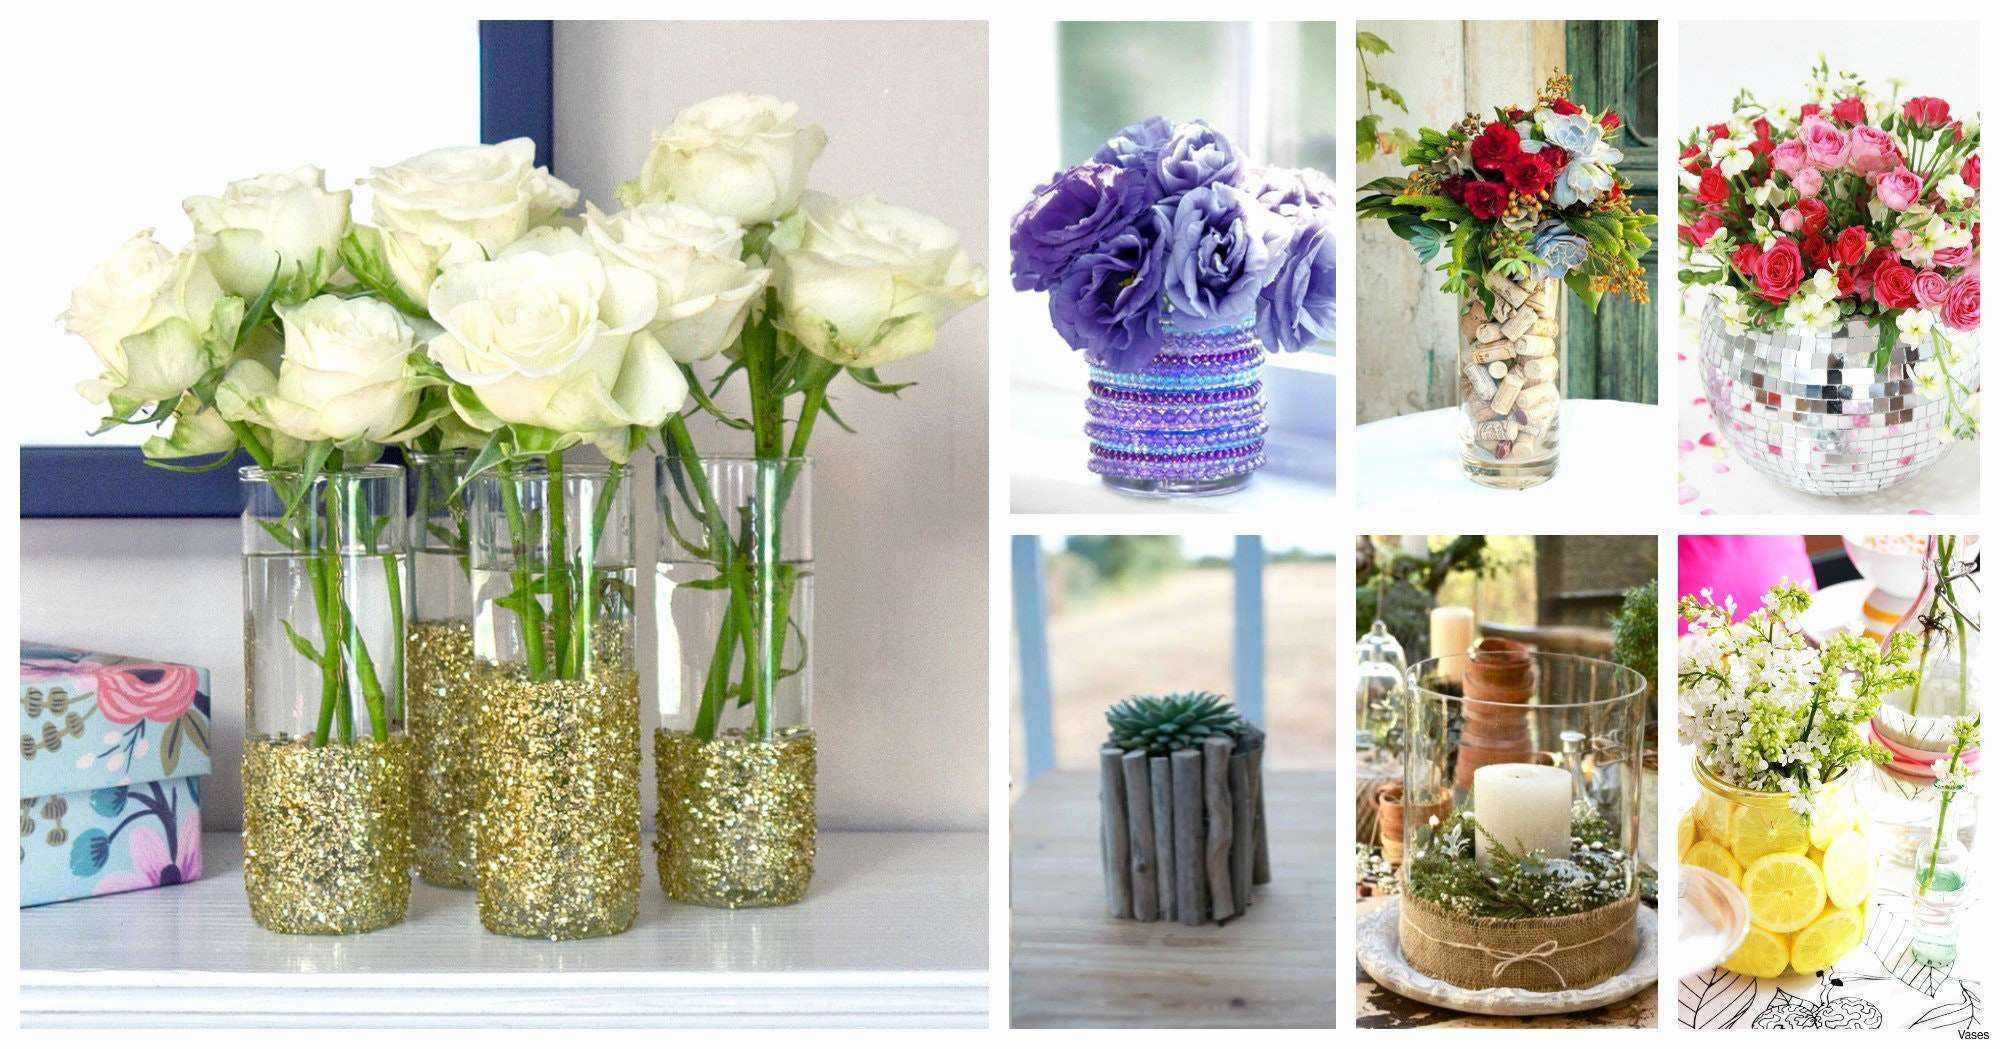 wholesale cylinder vases cheap of 40 glass vases bulk the weekly world with regard to 31 unique vases cheap